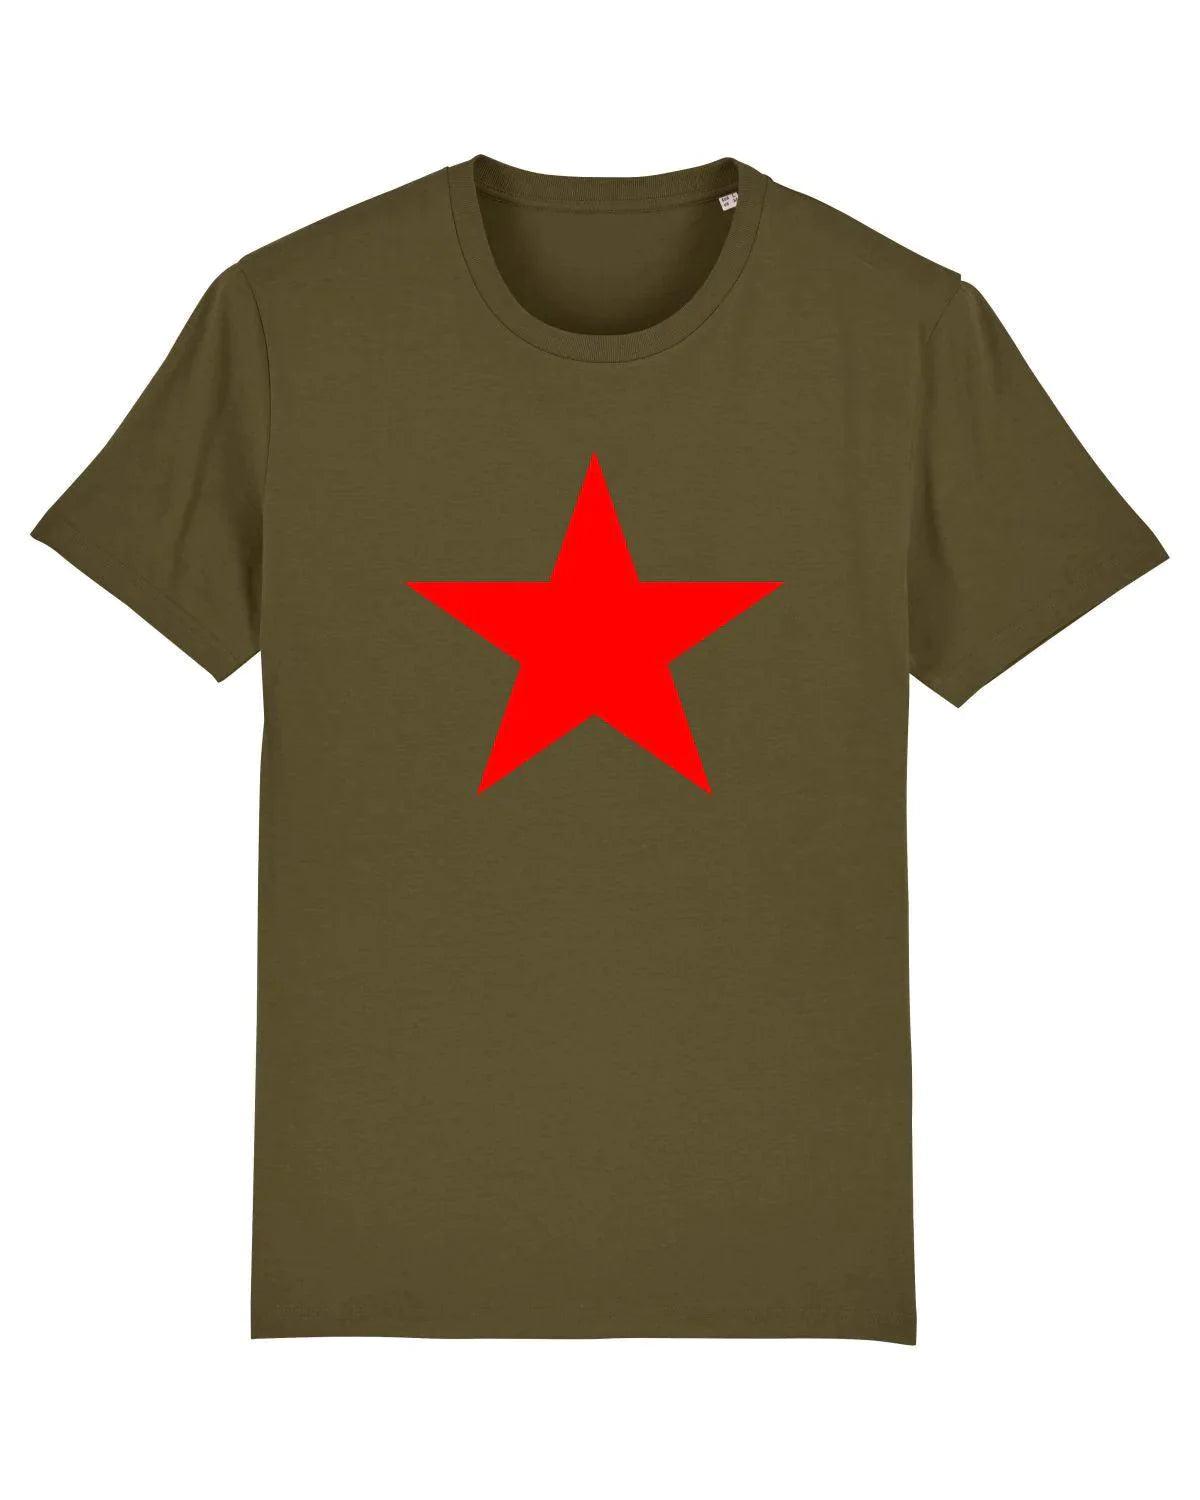 RED STAR: As Worn By Michael Stipe (R.E.M) and Indie Kids. T-Shirt And Sweatshirt - SOUND IS COLOUR